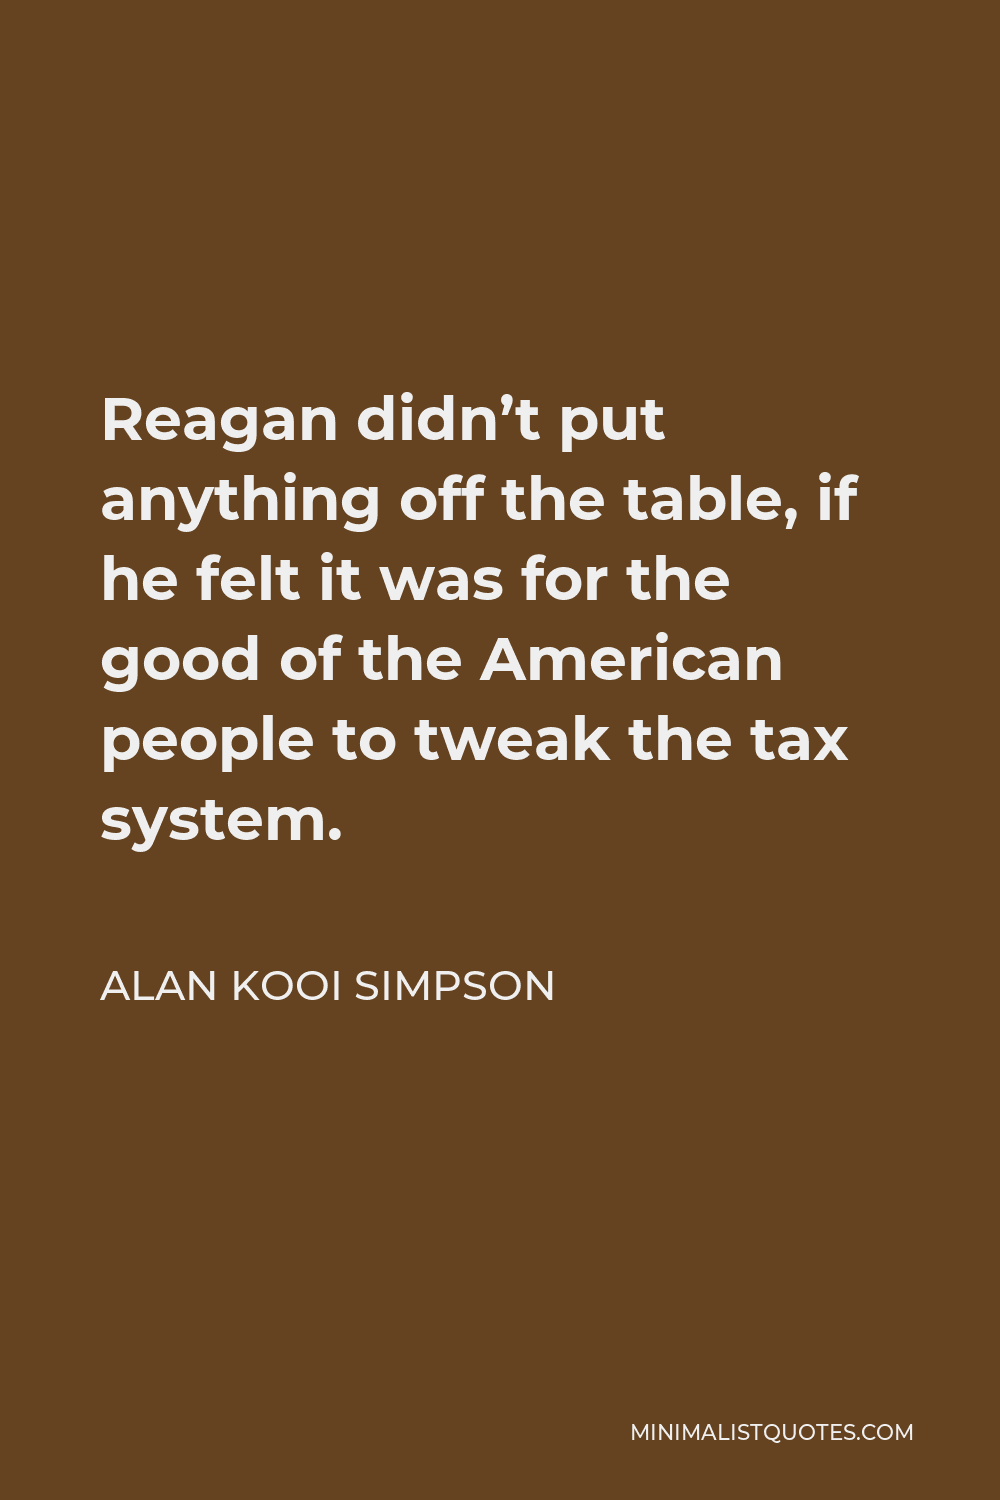 Alan Kooi Simpson Quote - Reagan didn’t put anything off the table, if he felt it was for the good of the American people to tweak the tax system.